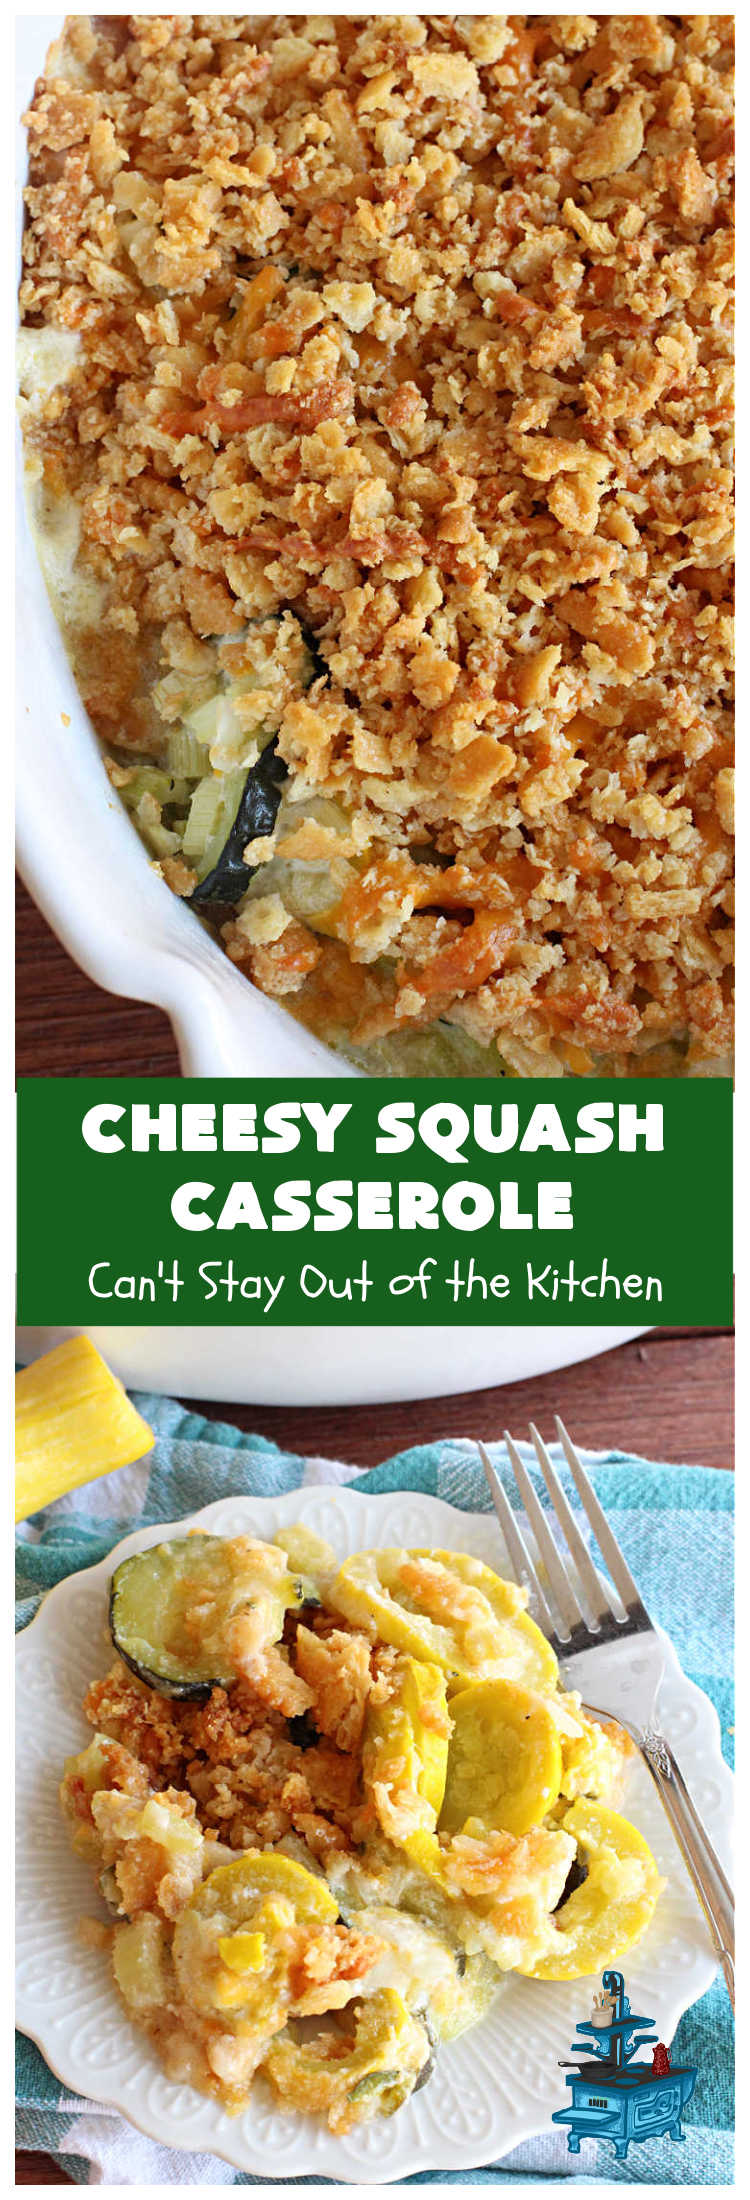 Cheesy Squash Casserole | Can't Stay Out of the Kitchen | this fantastic #Squash #SideDish is so delightful & easy to whip up you'll want to make it frequently. It's terrific for company or #holiday dinners like #Thanksgiving or #Christmas. The #RitzCracker topping makes everything irresistible. #CheddarCheese #Zucchini #YellowSquash #casserole #CheesySquashCasserole